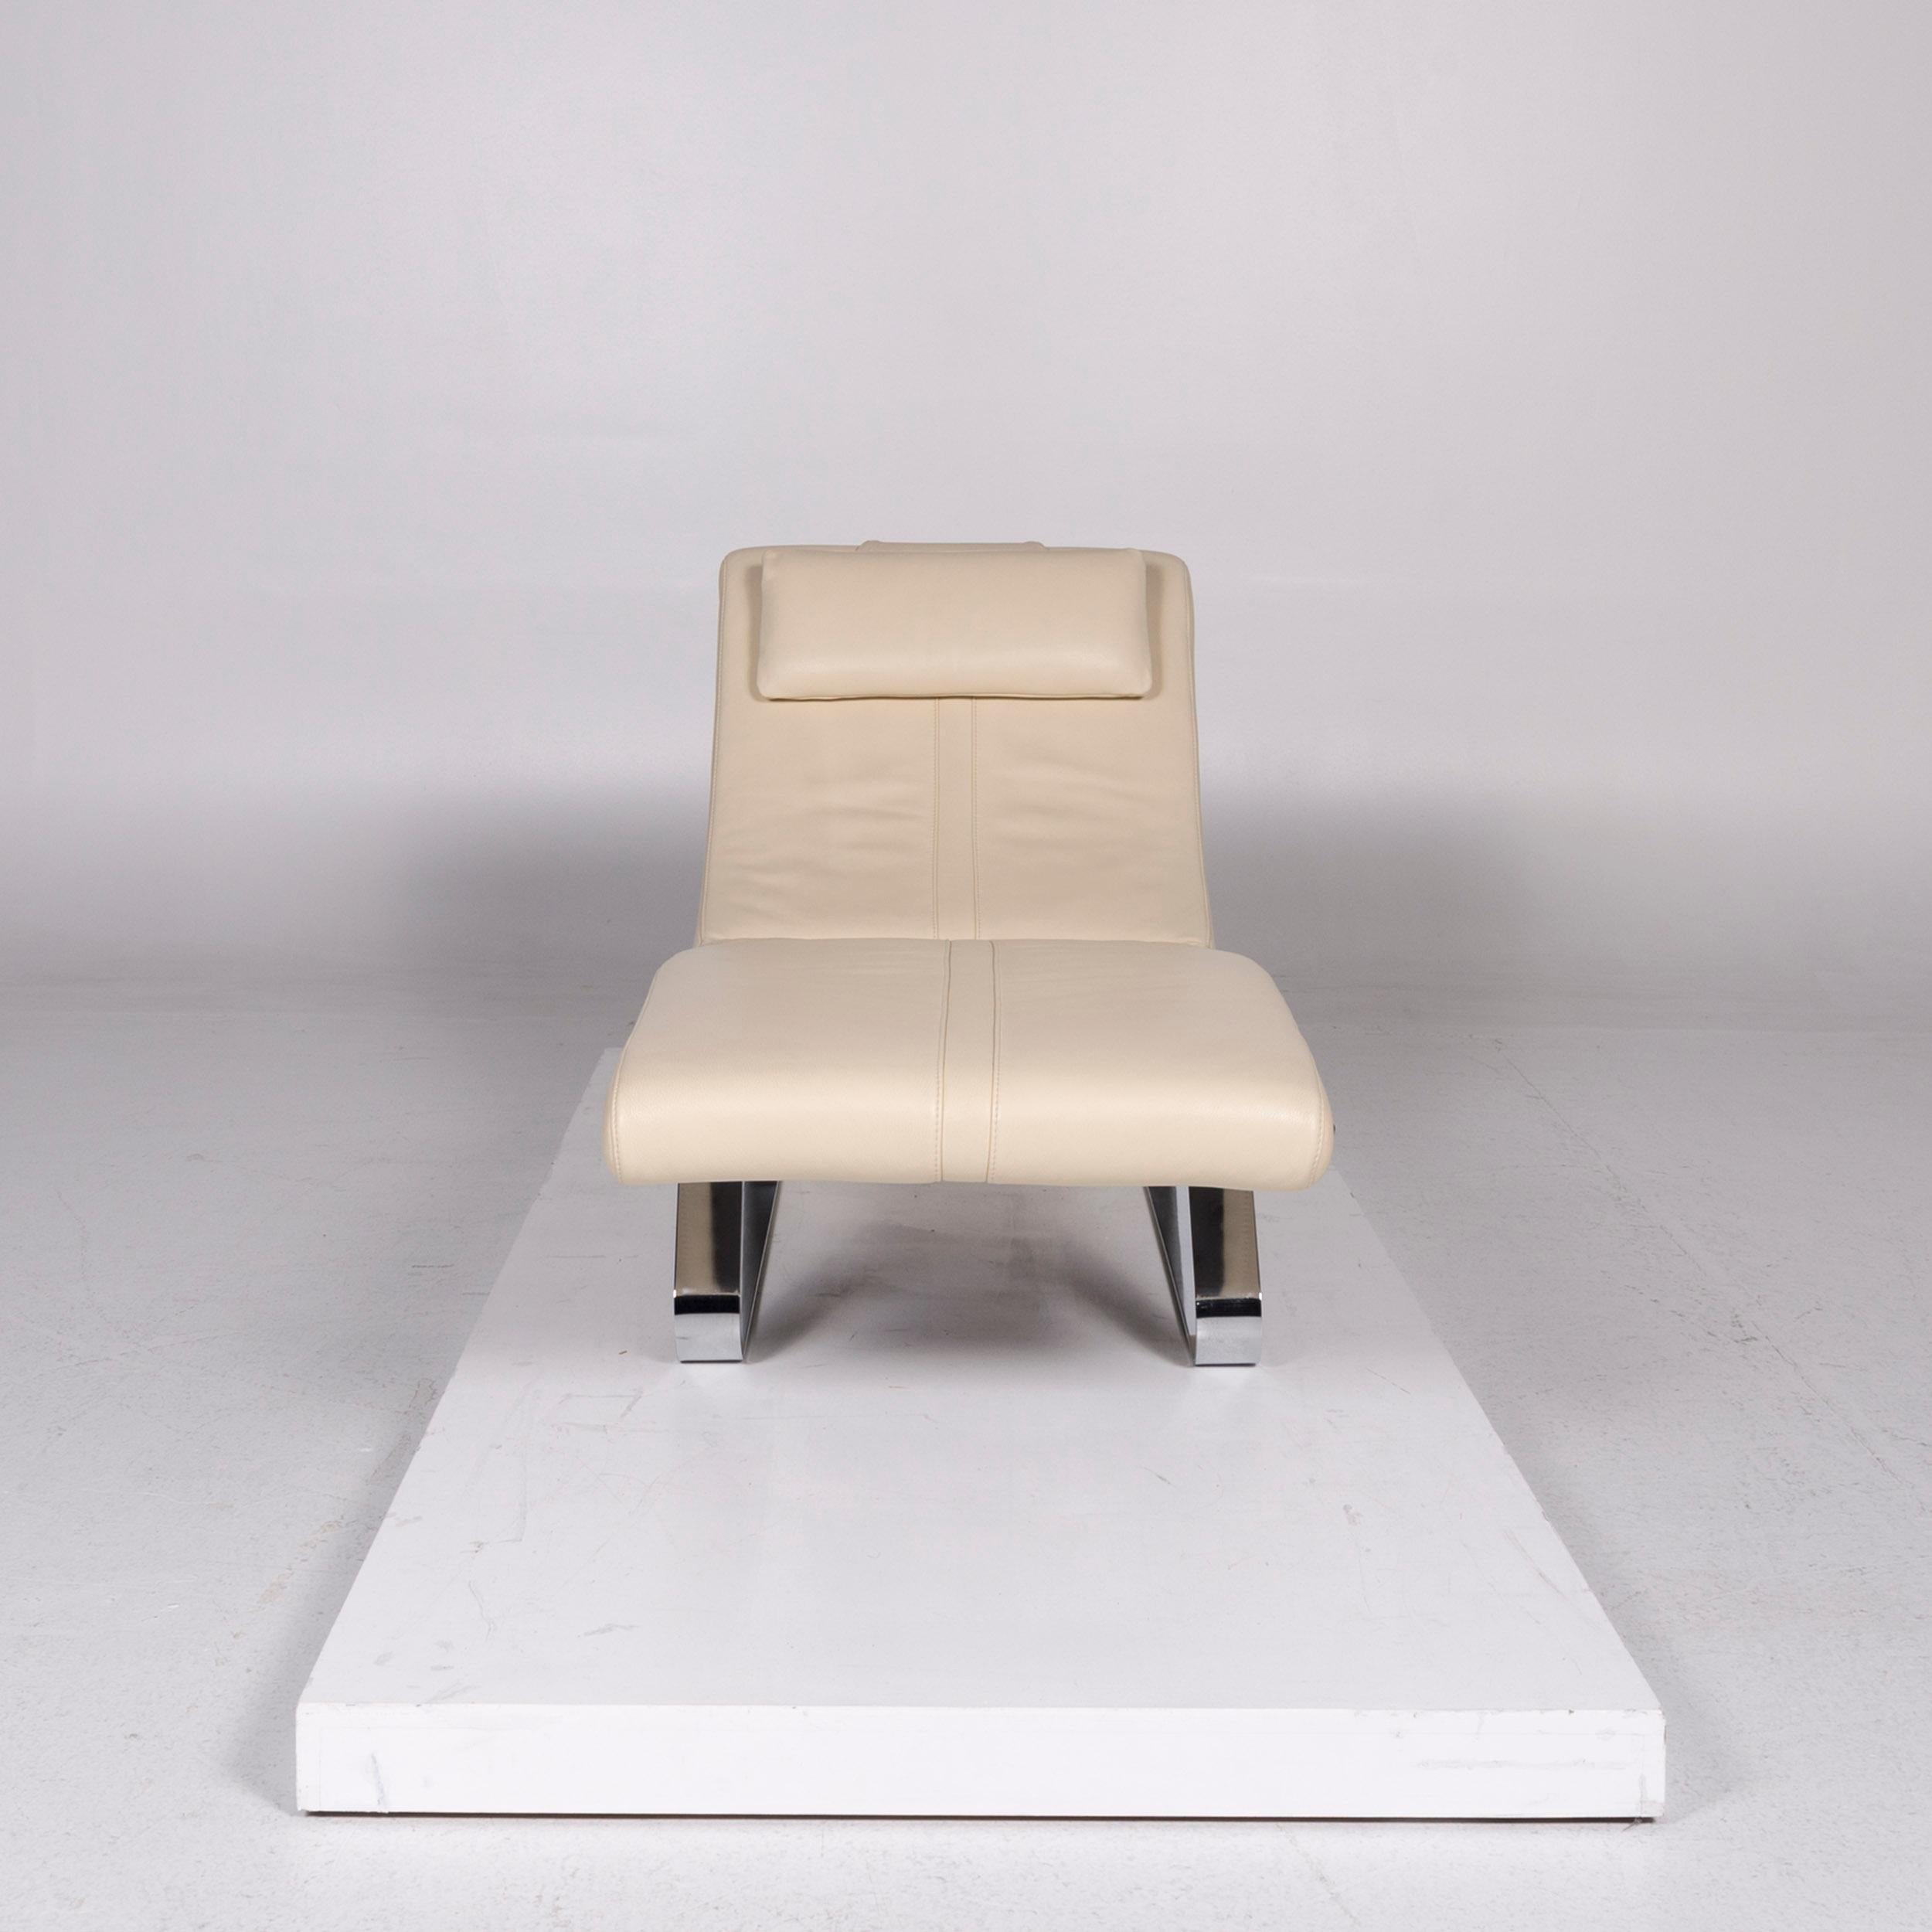 We bring to you a pattern ring leather lounger cream relax lounger.
    
 
 Product measurements in centimeters:
 
 Depth 168
Width 62
Height 77
Seat-height 39
Seat-depth 115
Seat-width 62
Back-height 44.
   